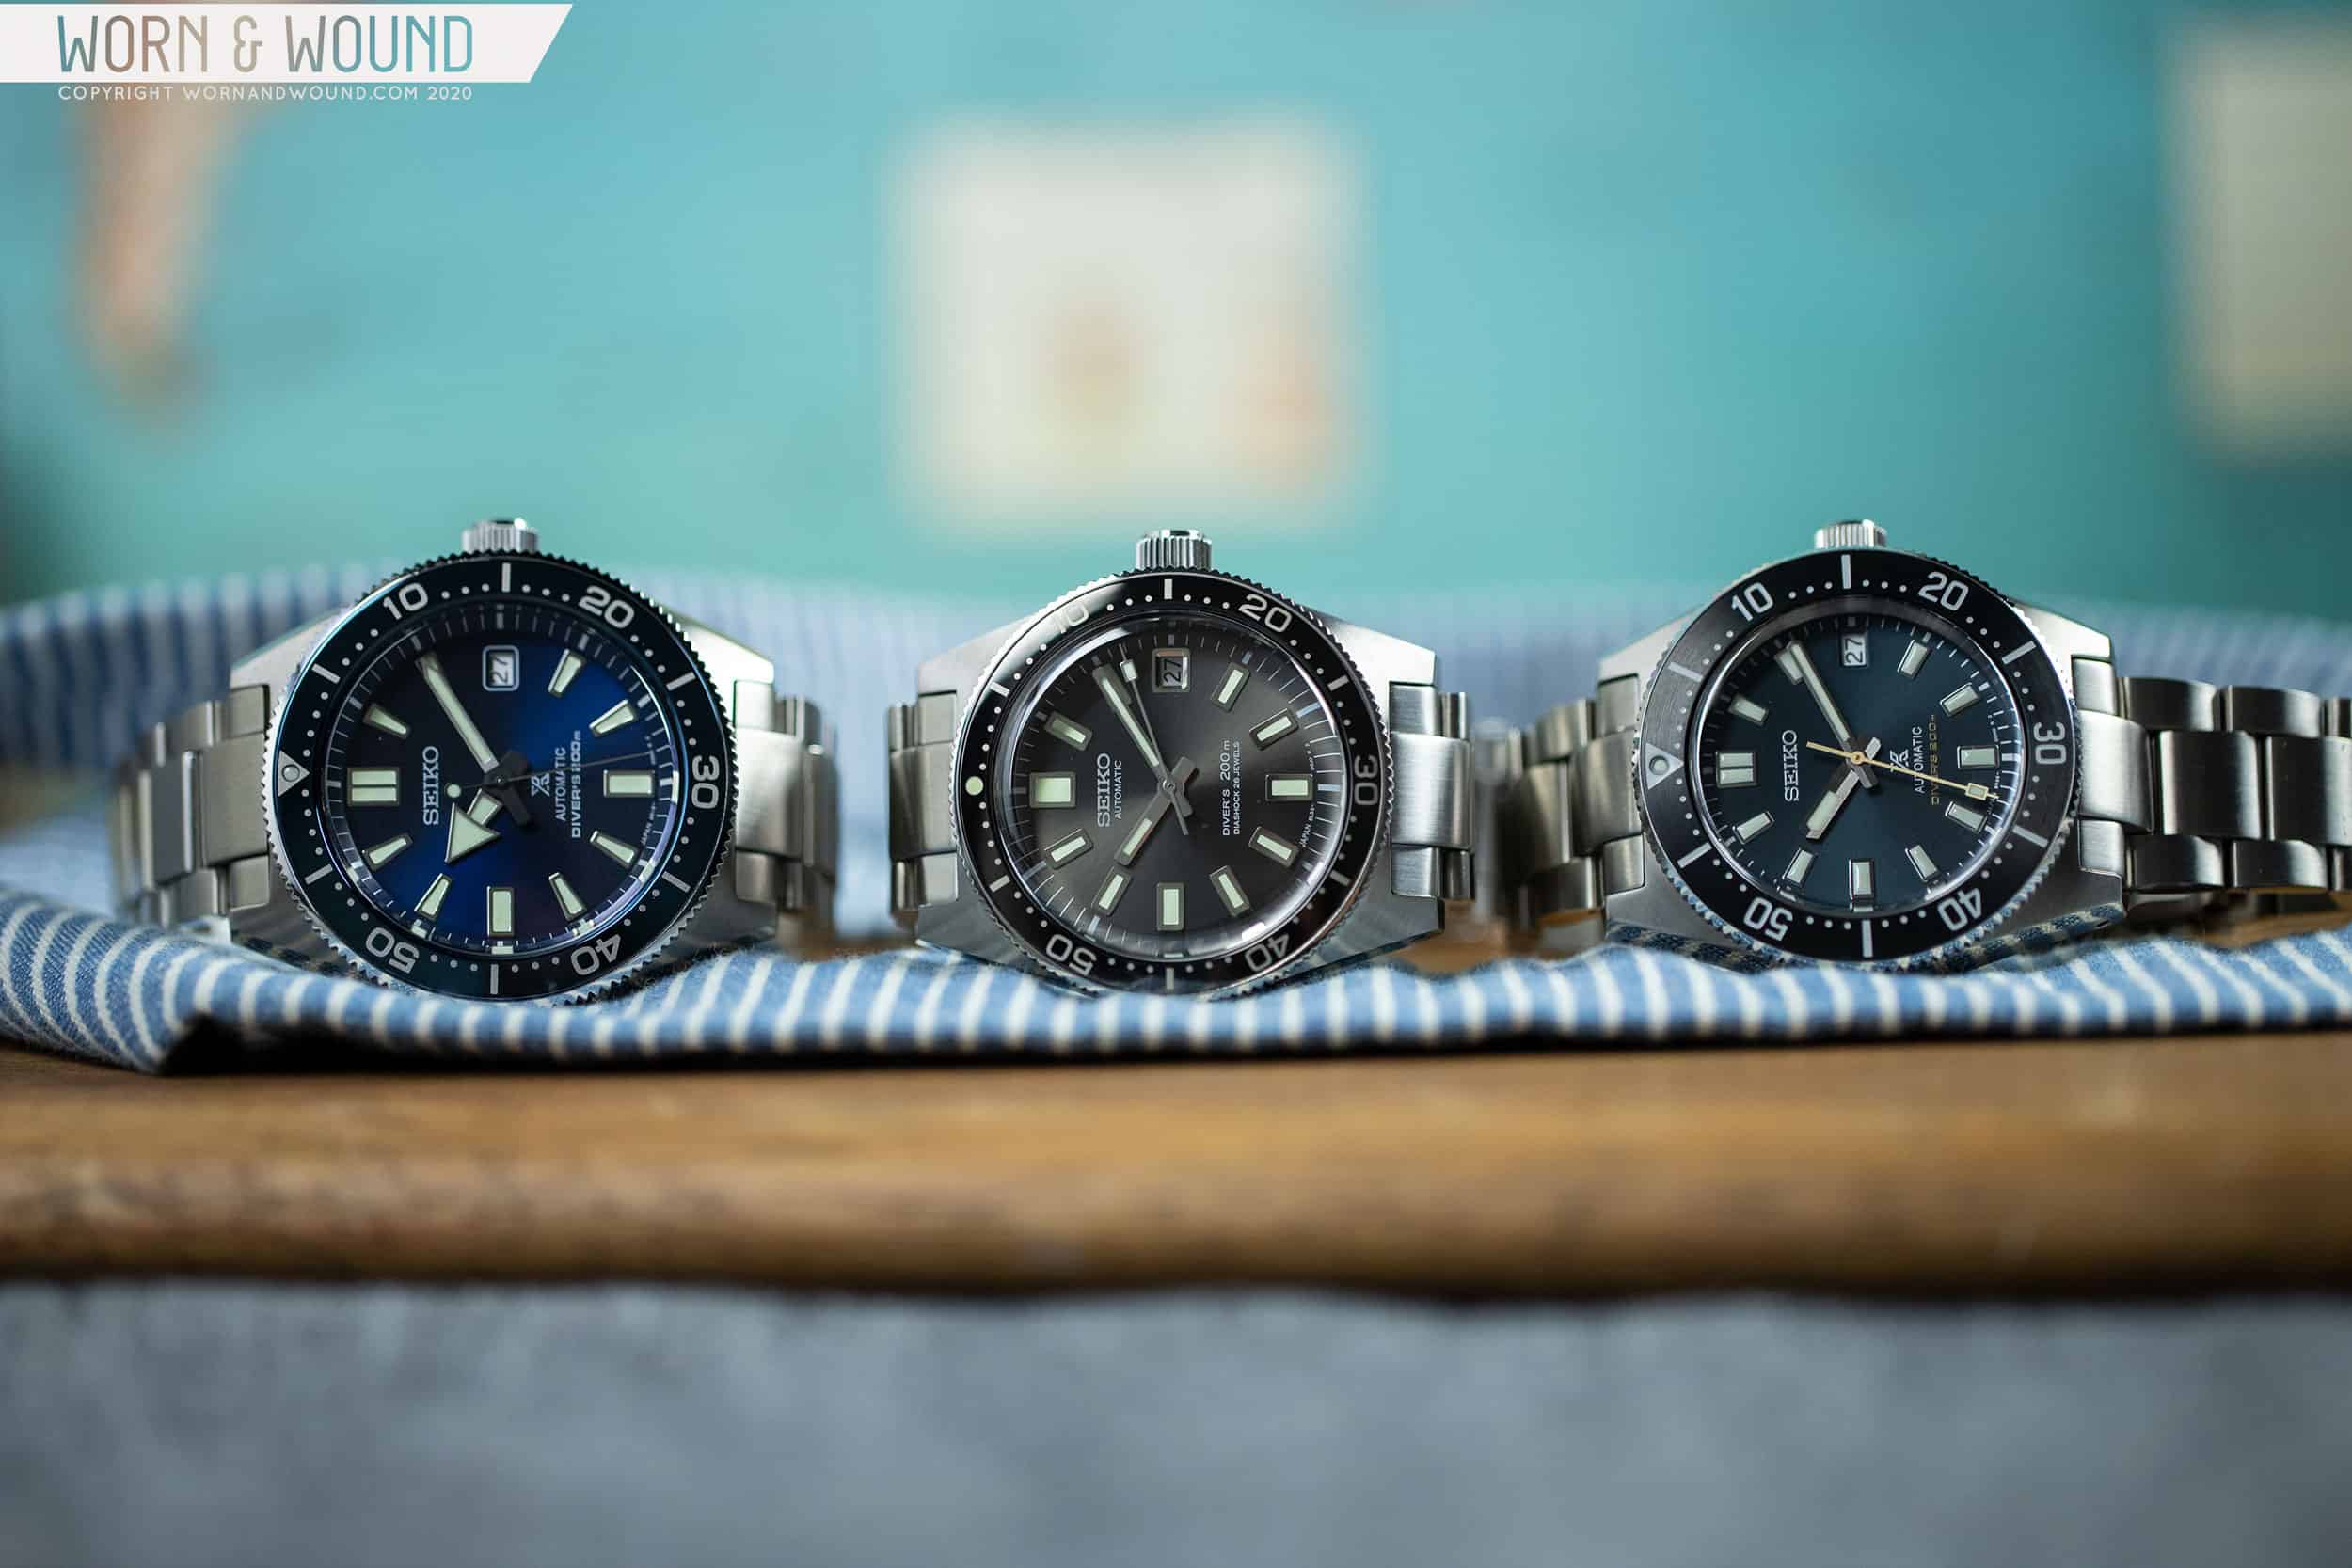 The Seiko 62MAS Family - Three Generations Compared - Worn & Wound